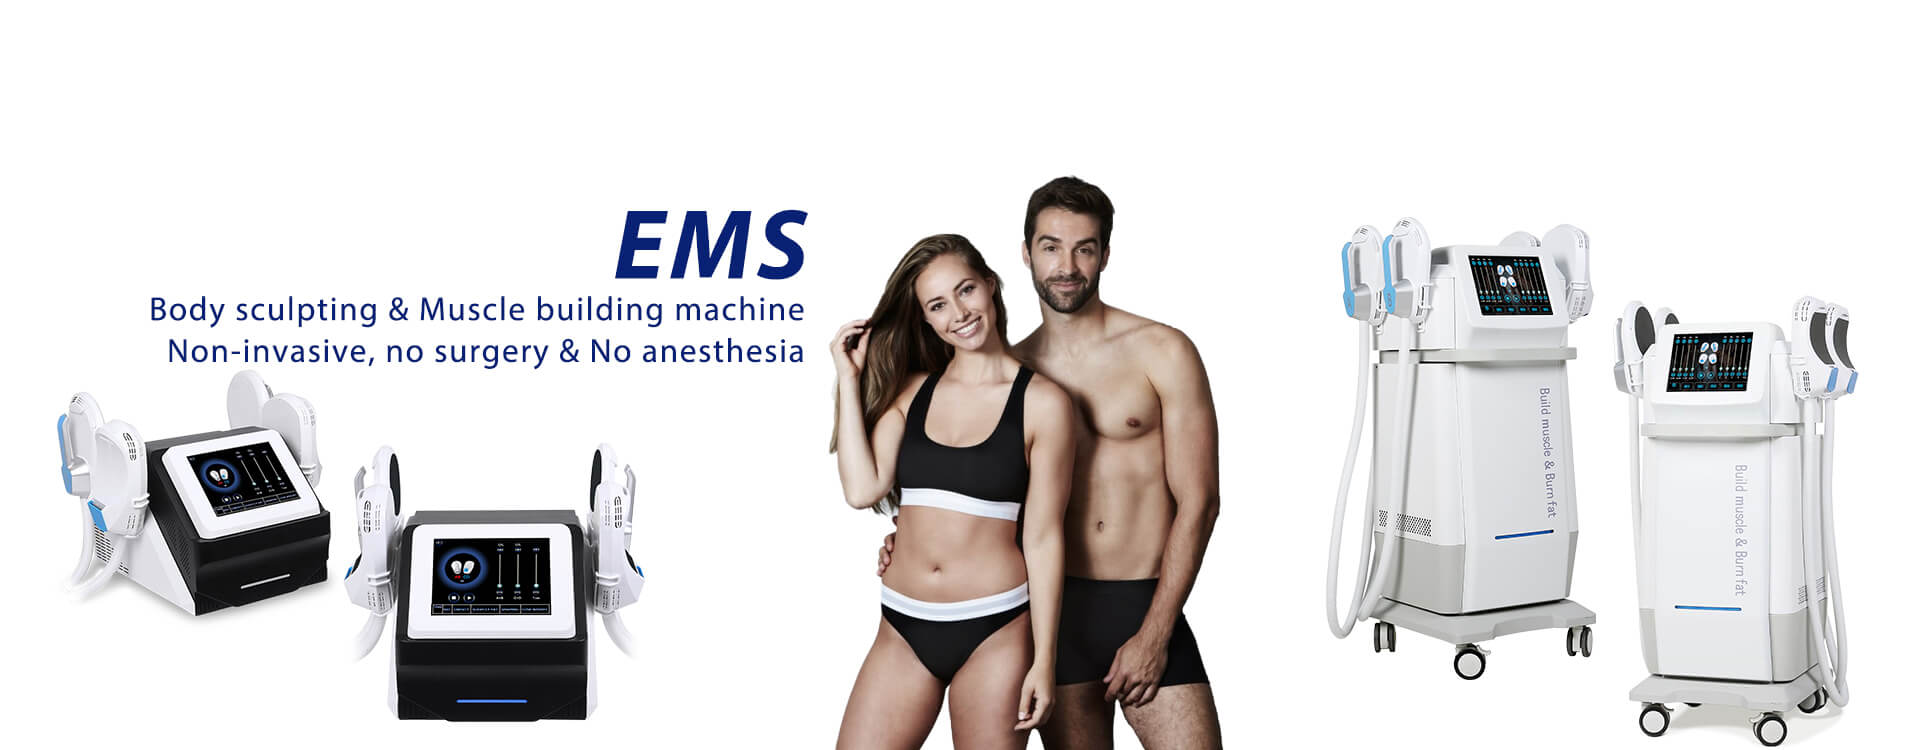 Best EMS Machine For Weight Loss - Tone & Sculpt Your Body